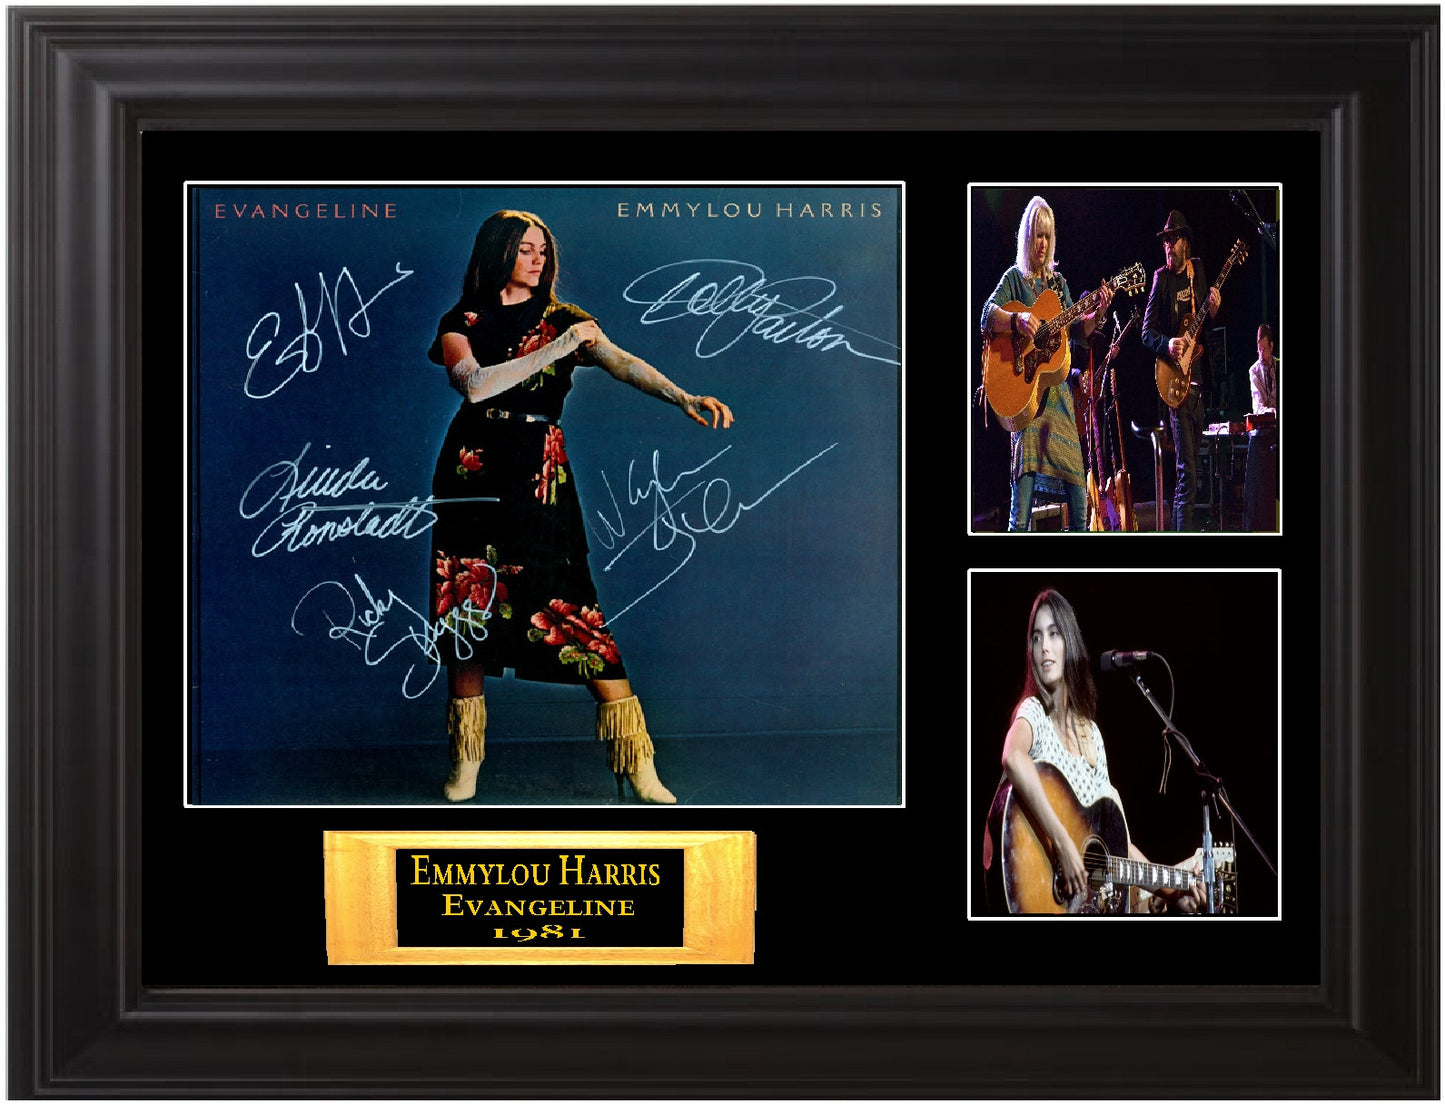 Emmylou Harris Band Signed Evangeline Album - Zion Graphic Collectibles